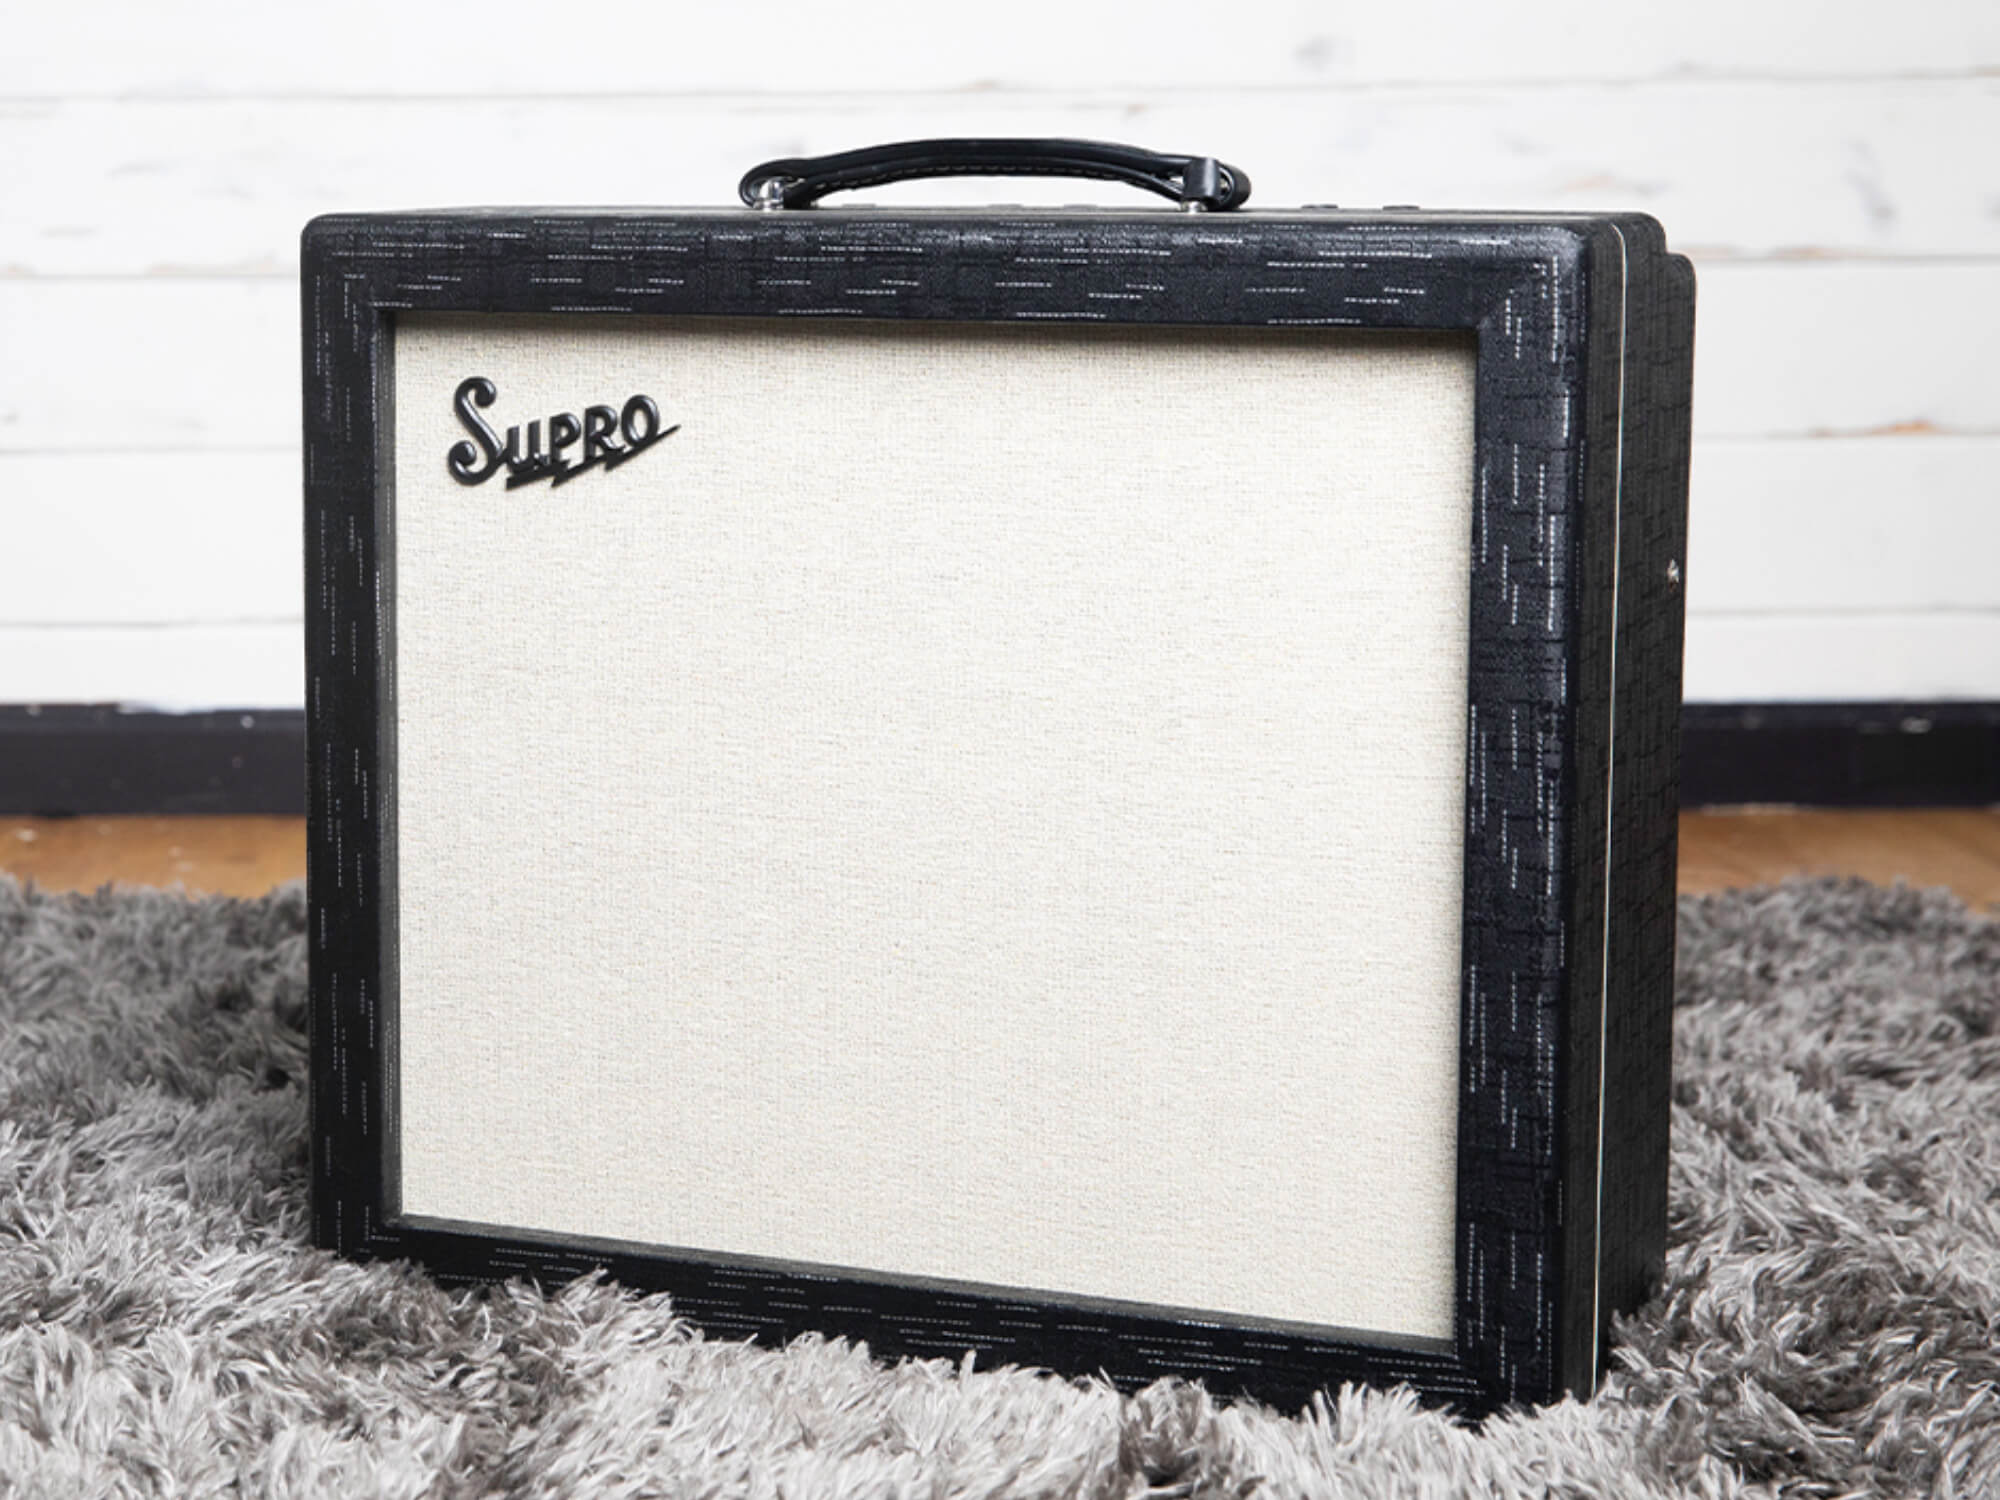 Supro's Royale